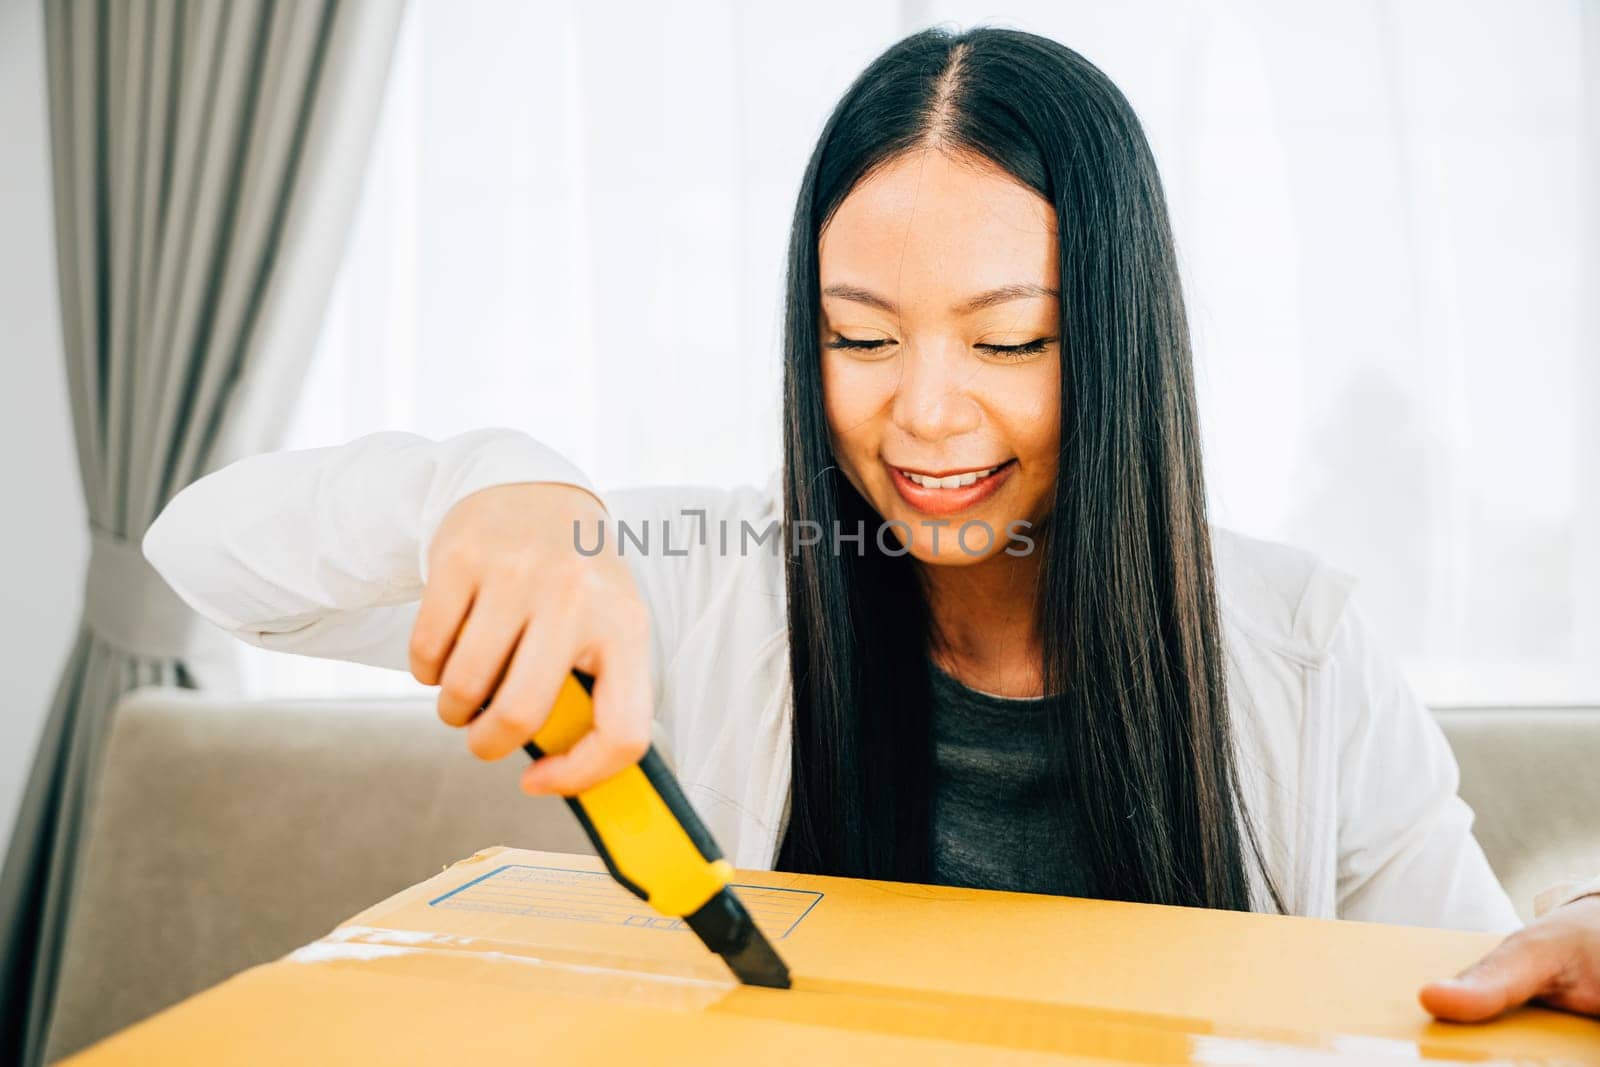 A woman on a sofa uses a cutter for precision unboxing revealing online shopping contents. Engaged in opening unpacking and discovering. Retail and surprise concept.